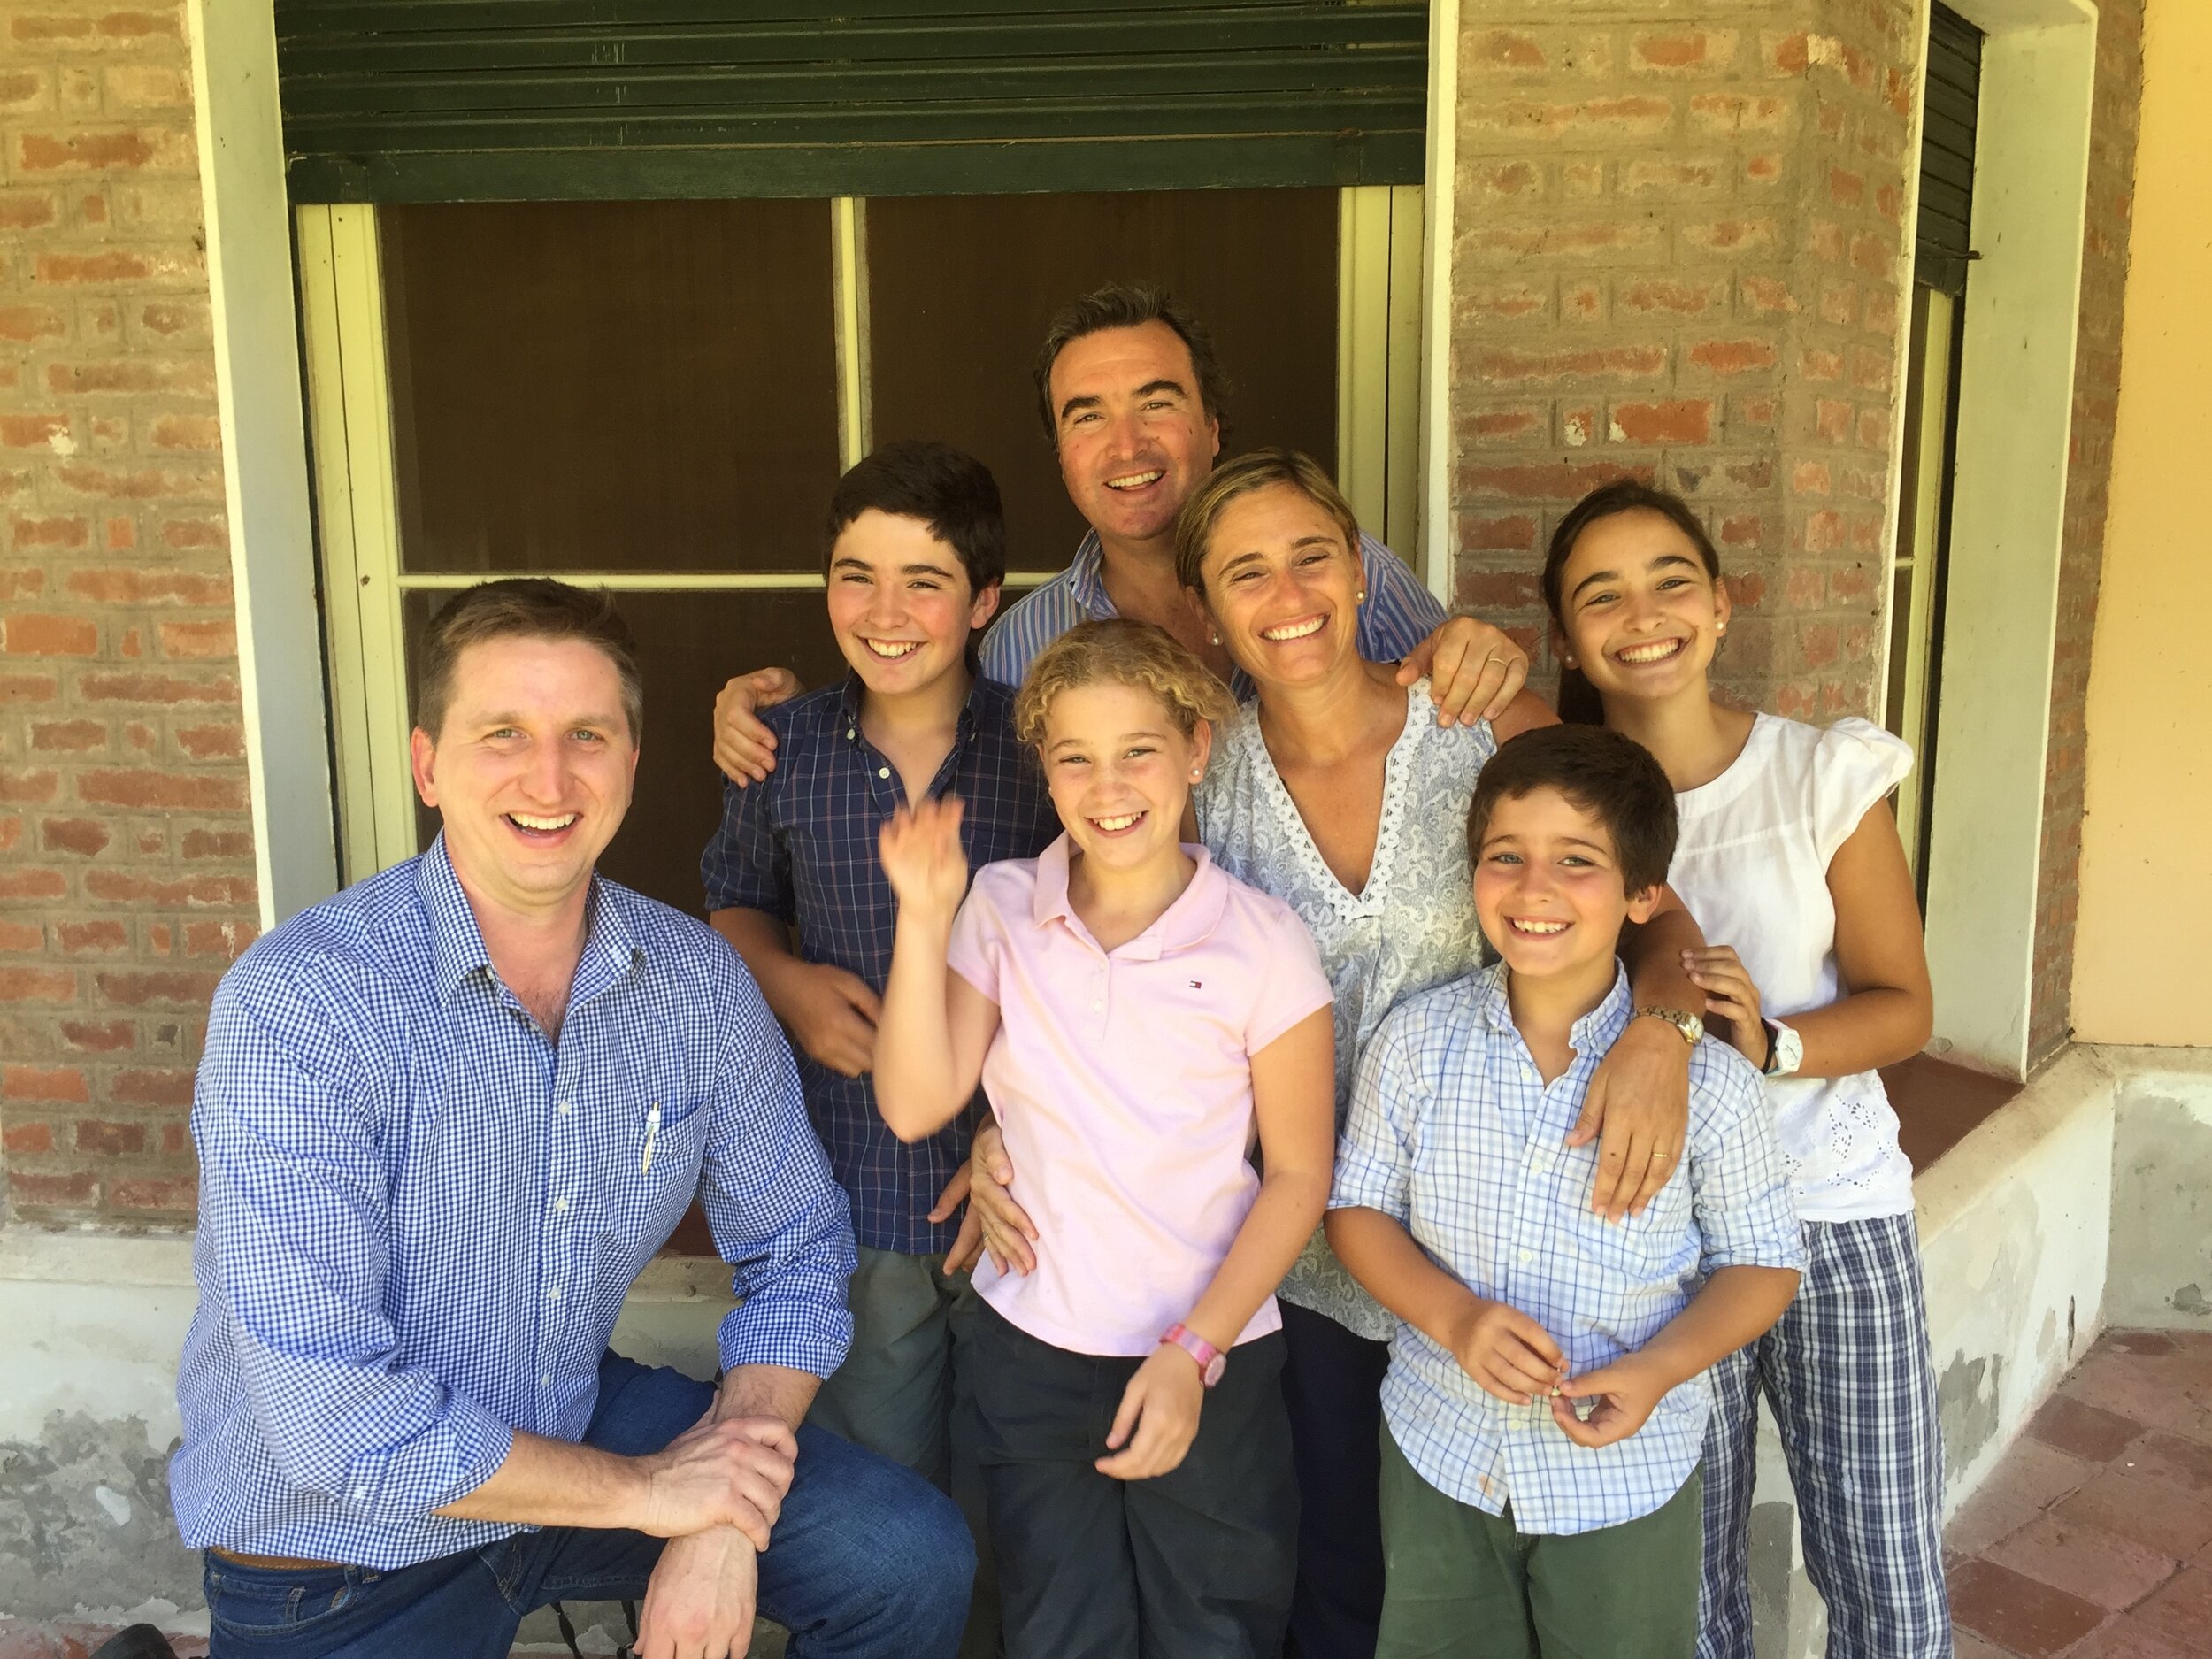 Chad Lee with the Uranga family in Argentina. Chad will introduce Maximo and Josefina, along with Joaquin Lagos, in the Early-Riser Session at the Kentucky Commodity Conference. They will discuss the ups and downs of growing grains in Argentina.